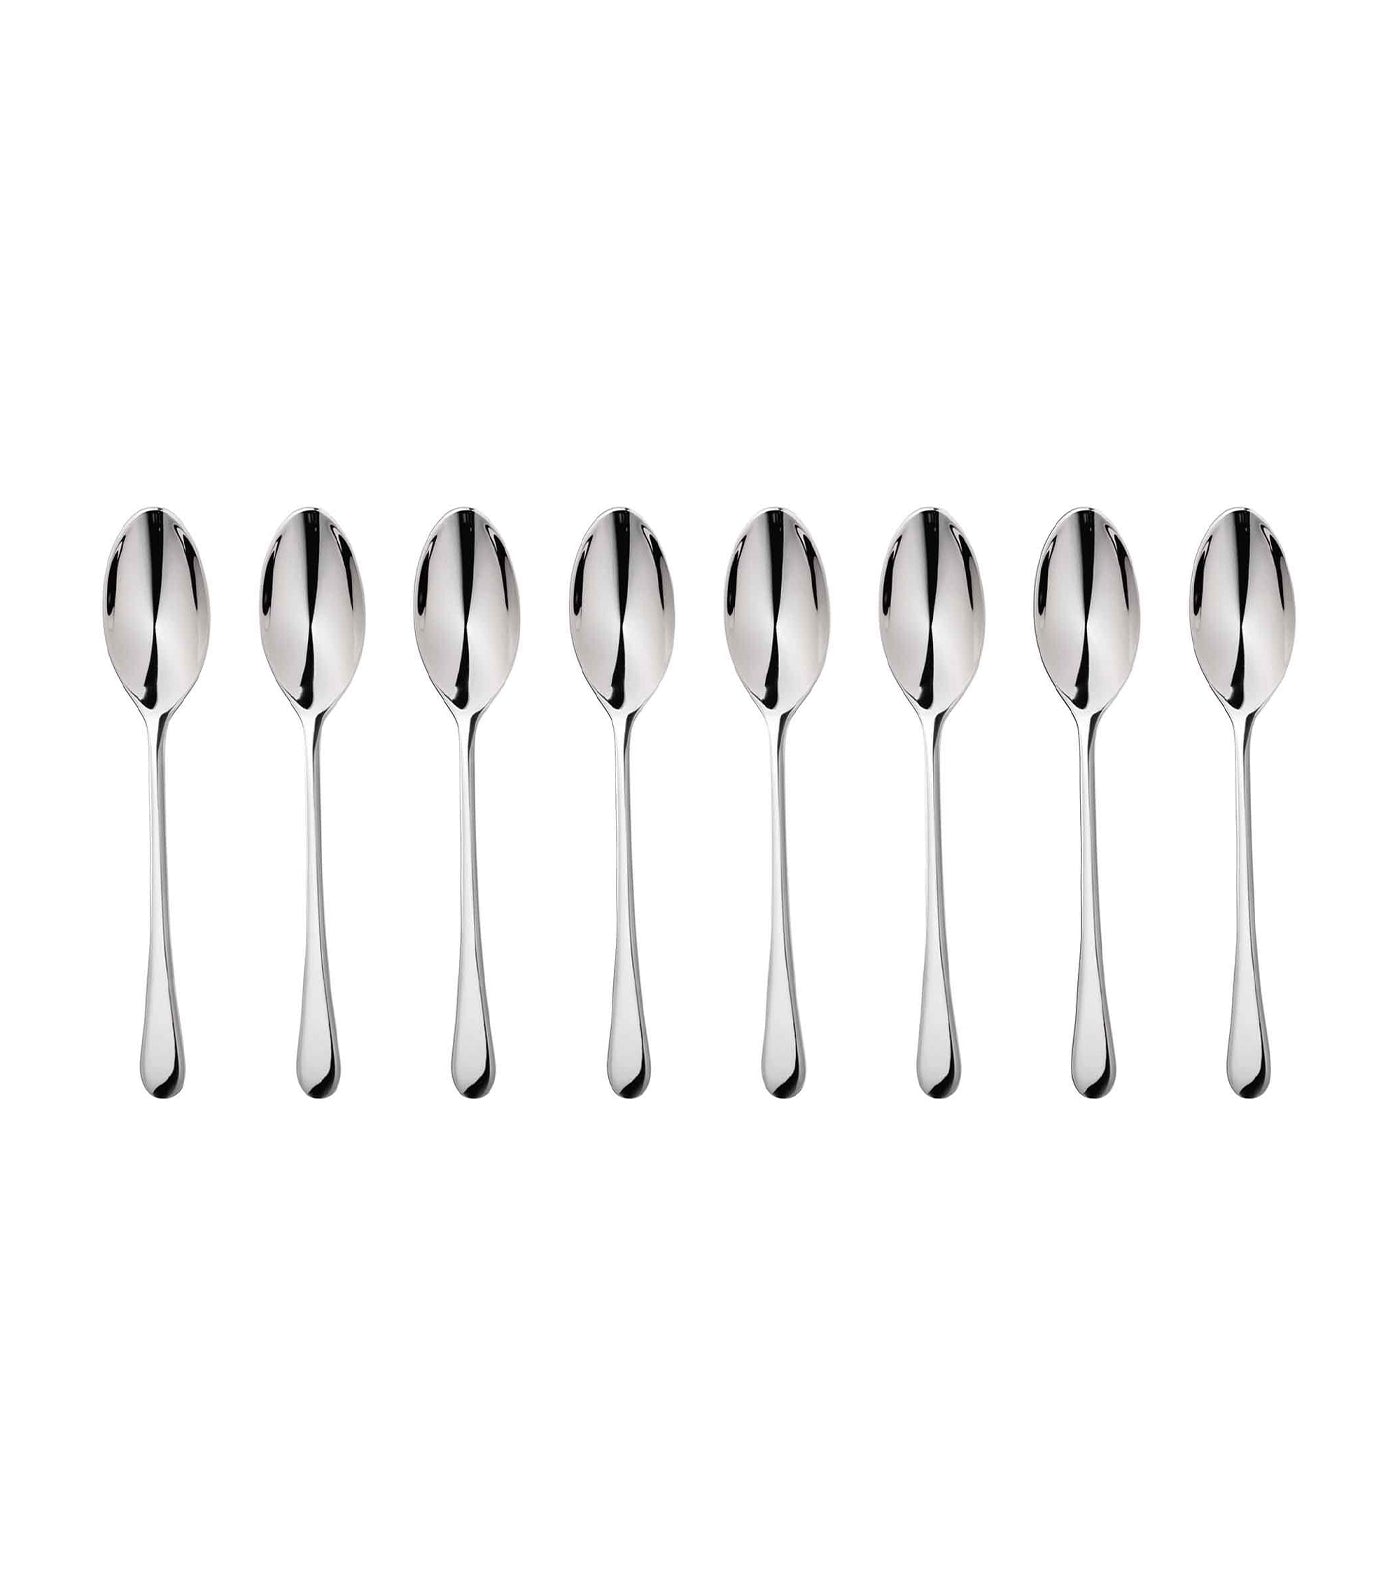 robert welch iona bright coffee spoon, set of 8